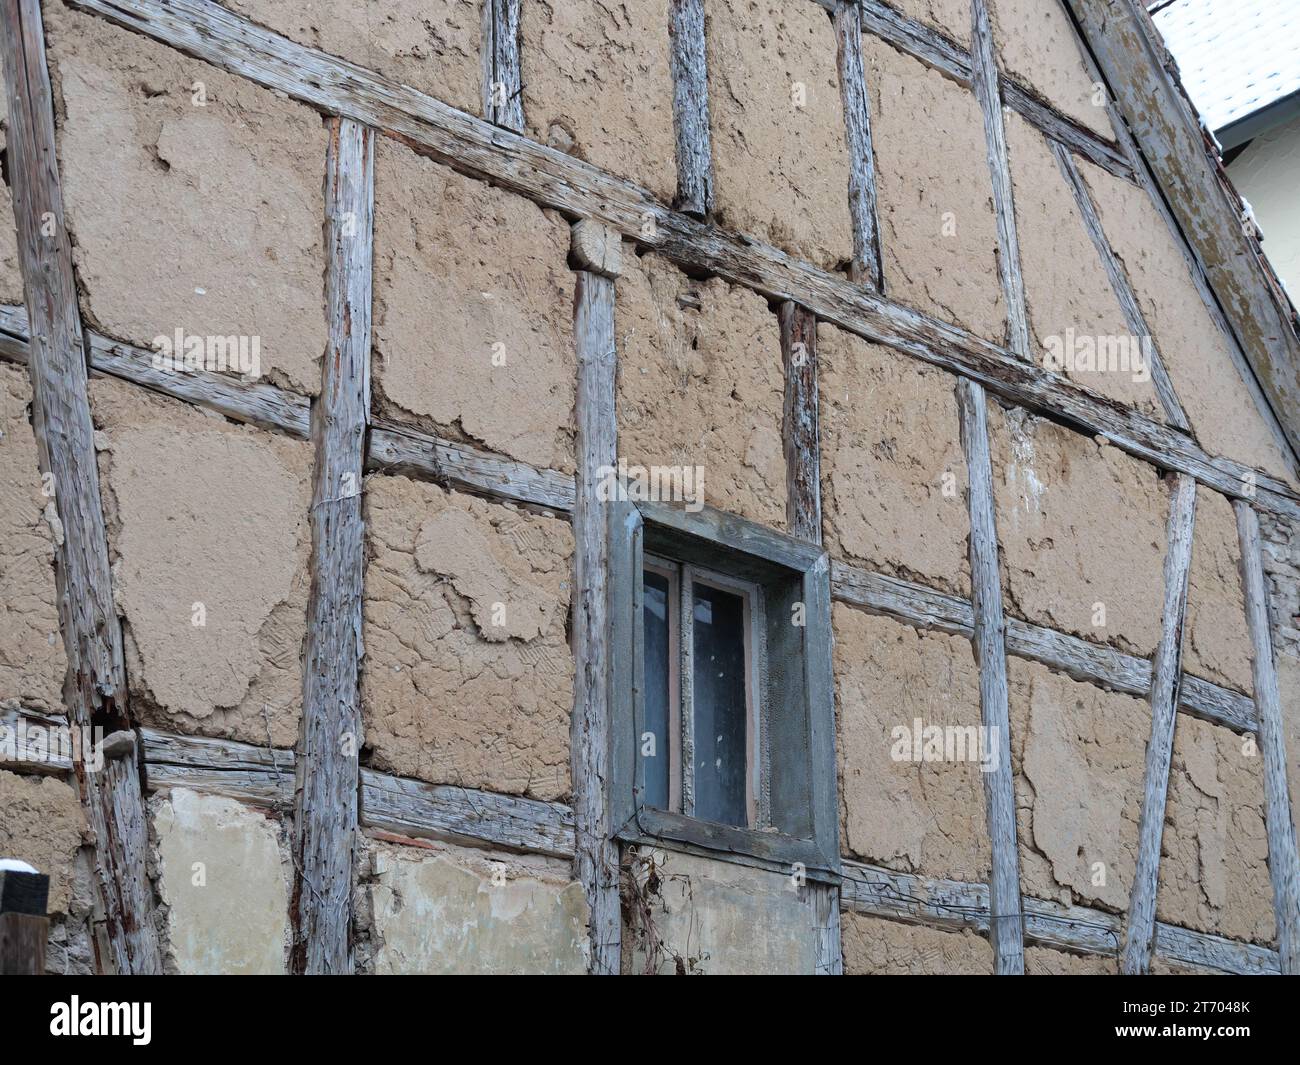 Detail of an old half-timbered house with beams, windows and adobe walls Stock Photo